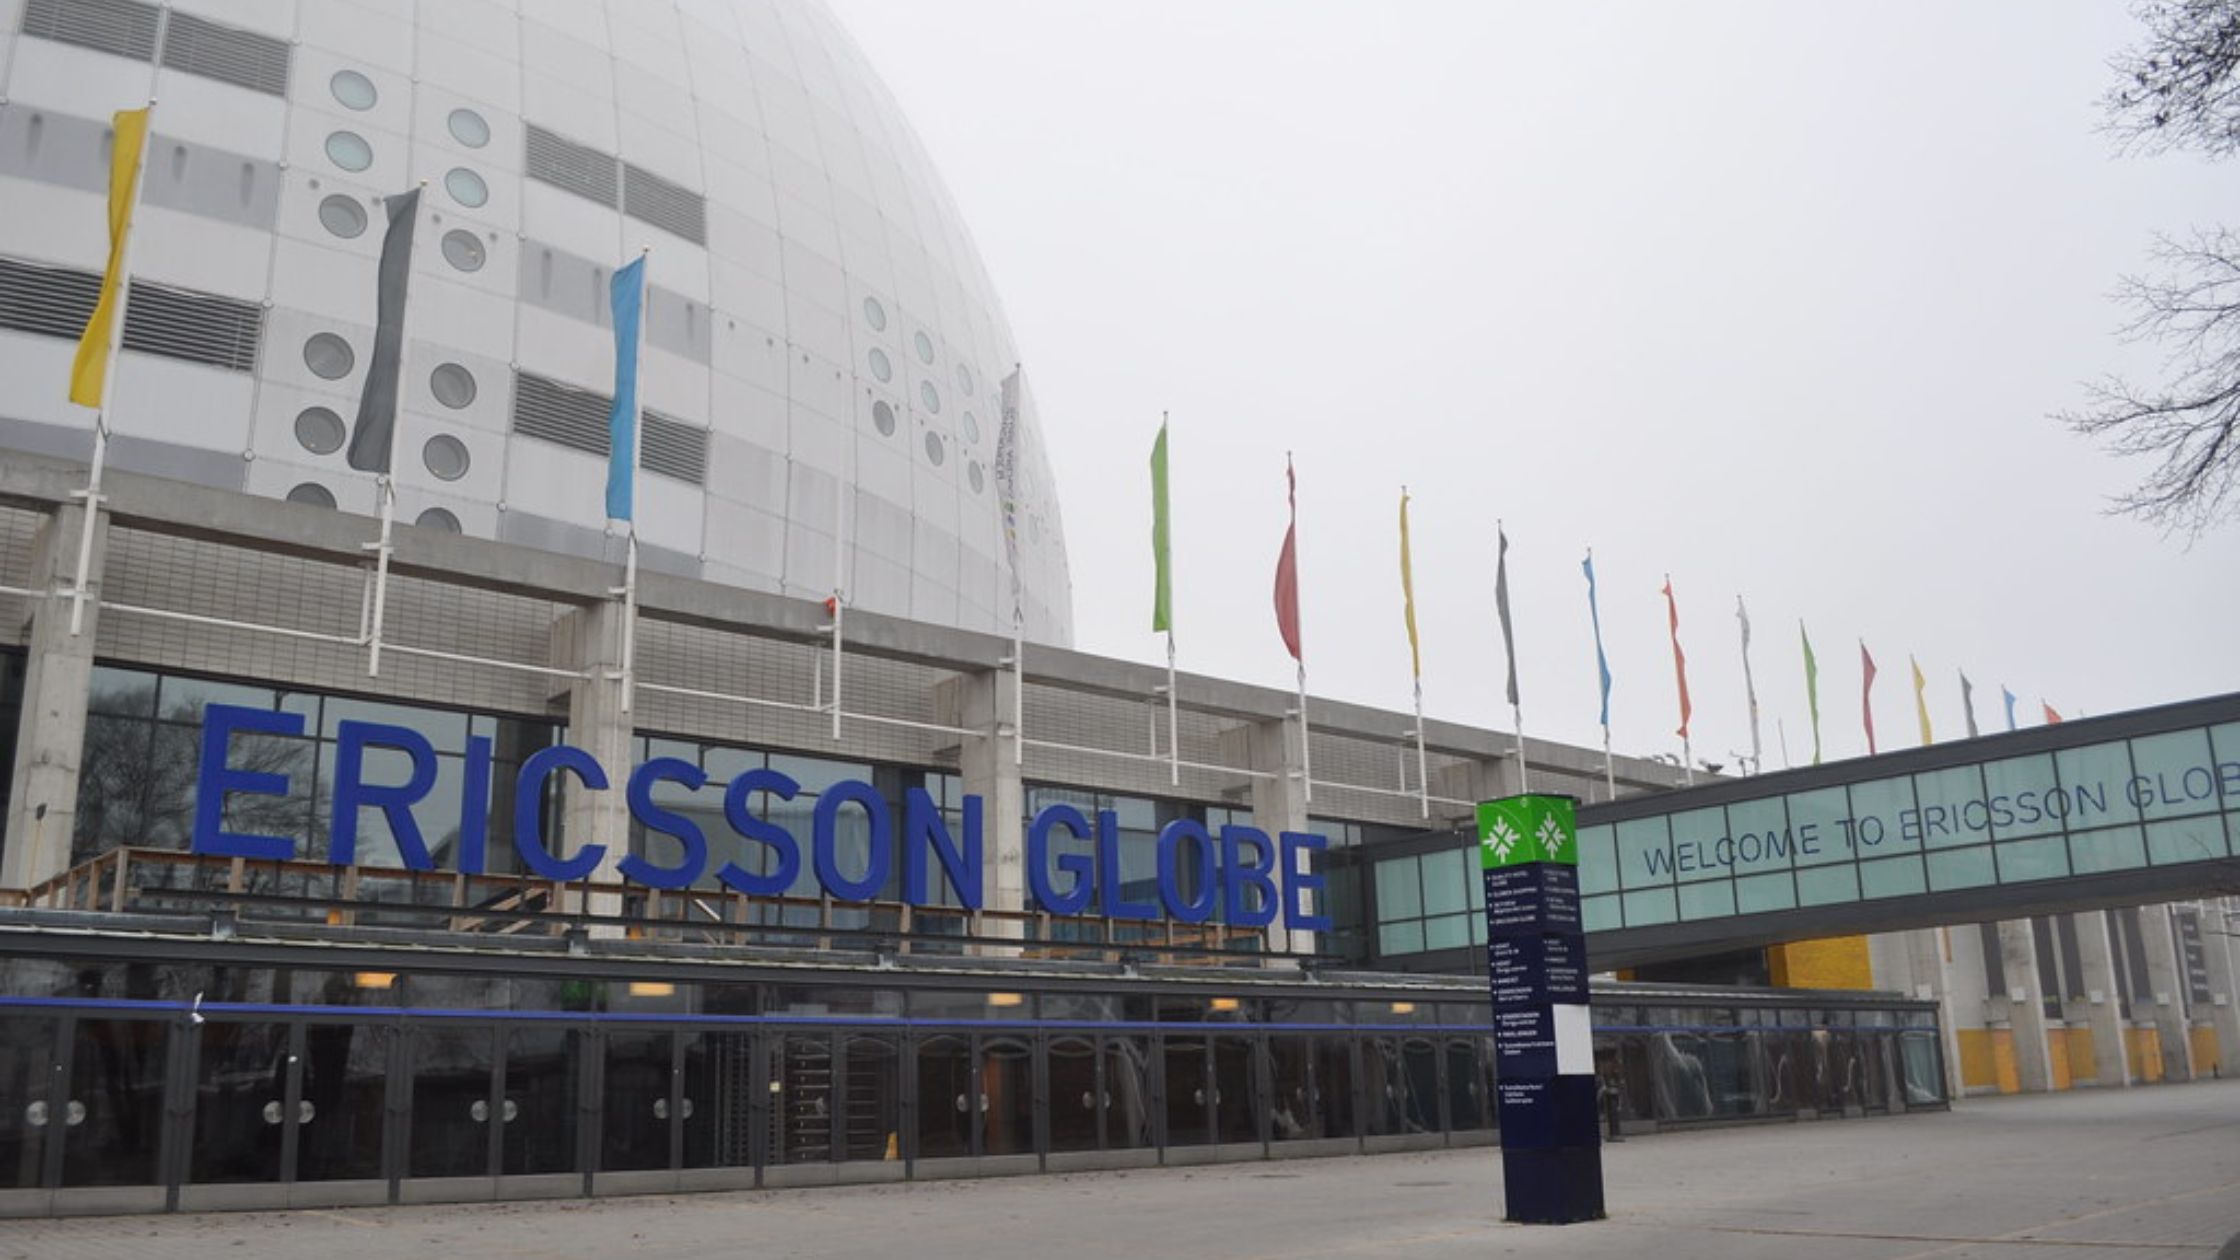 An outside view of the Ericsson Globe office